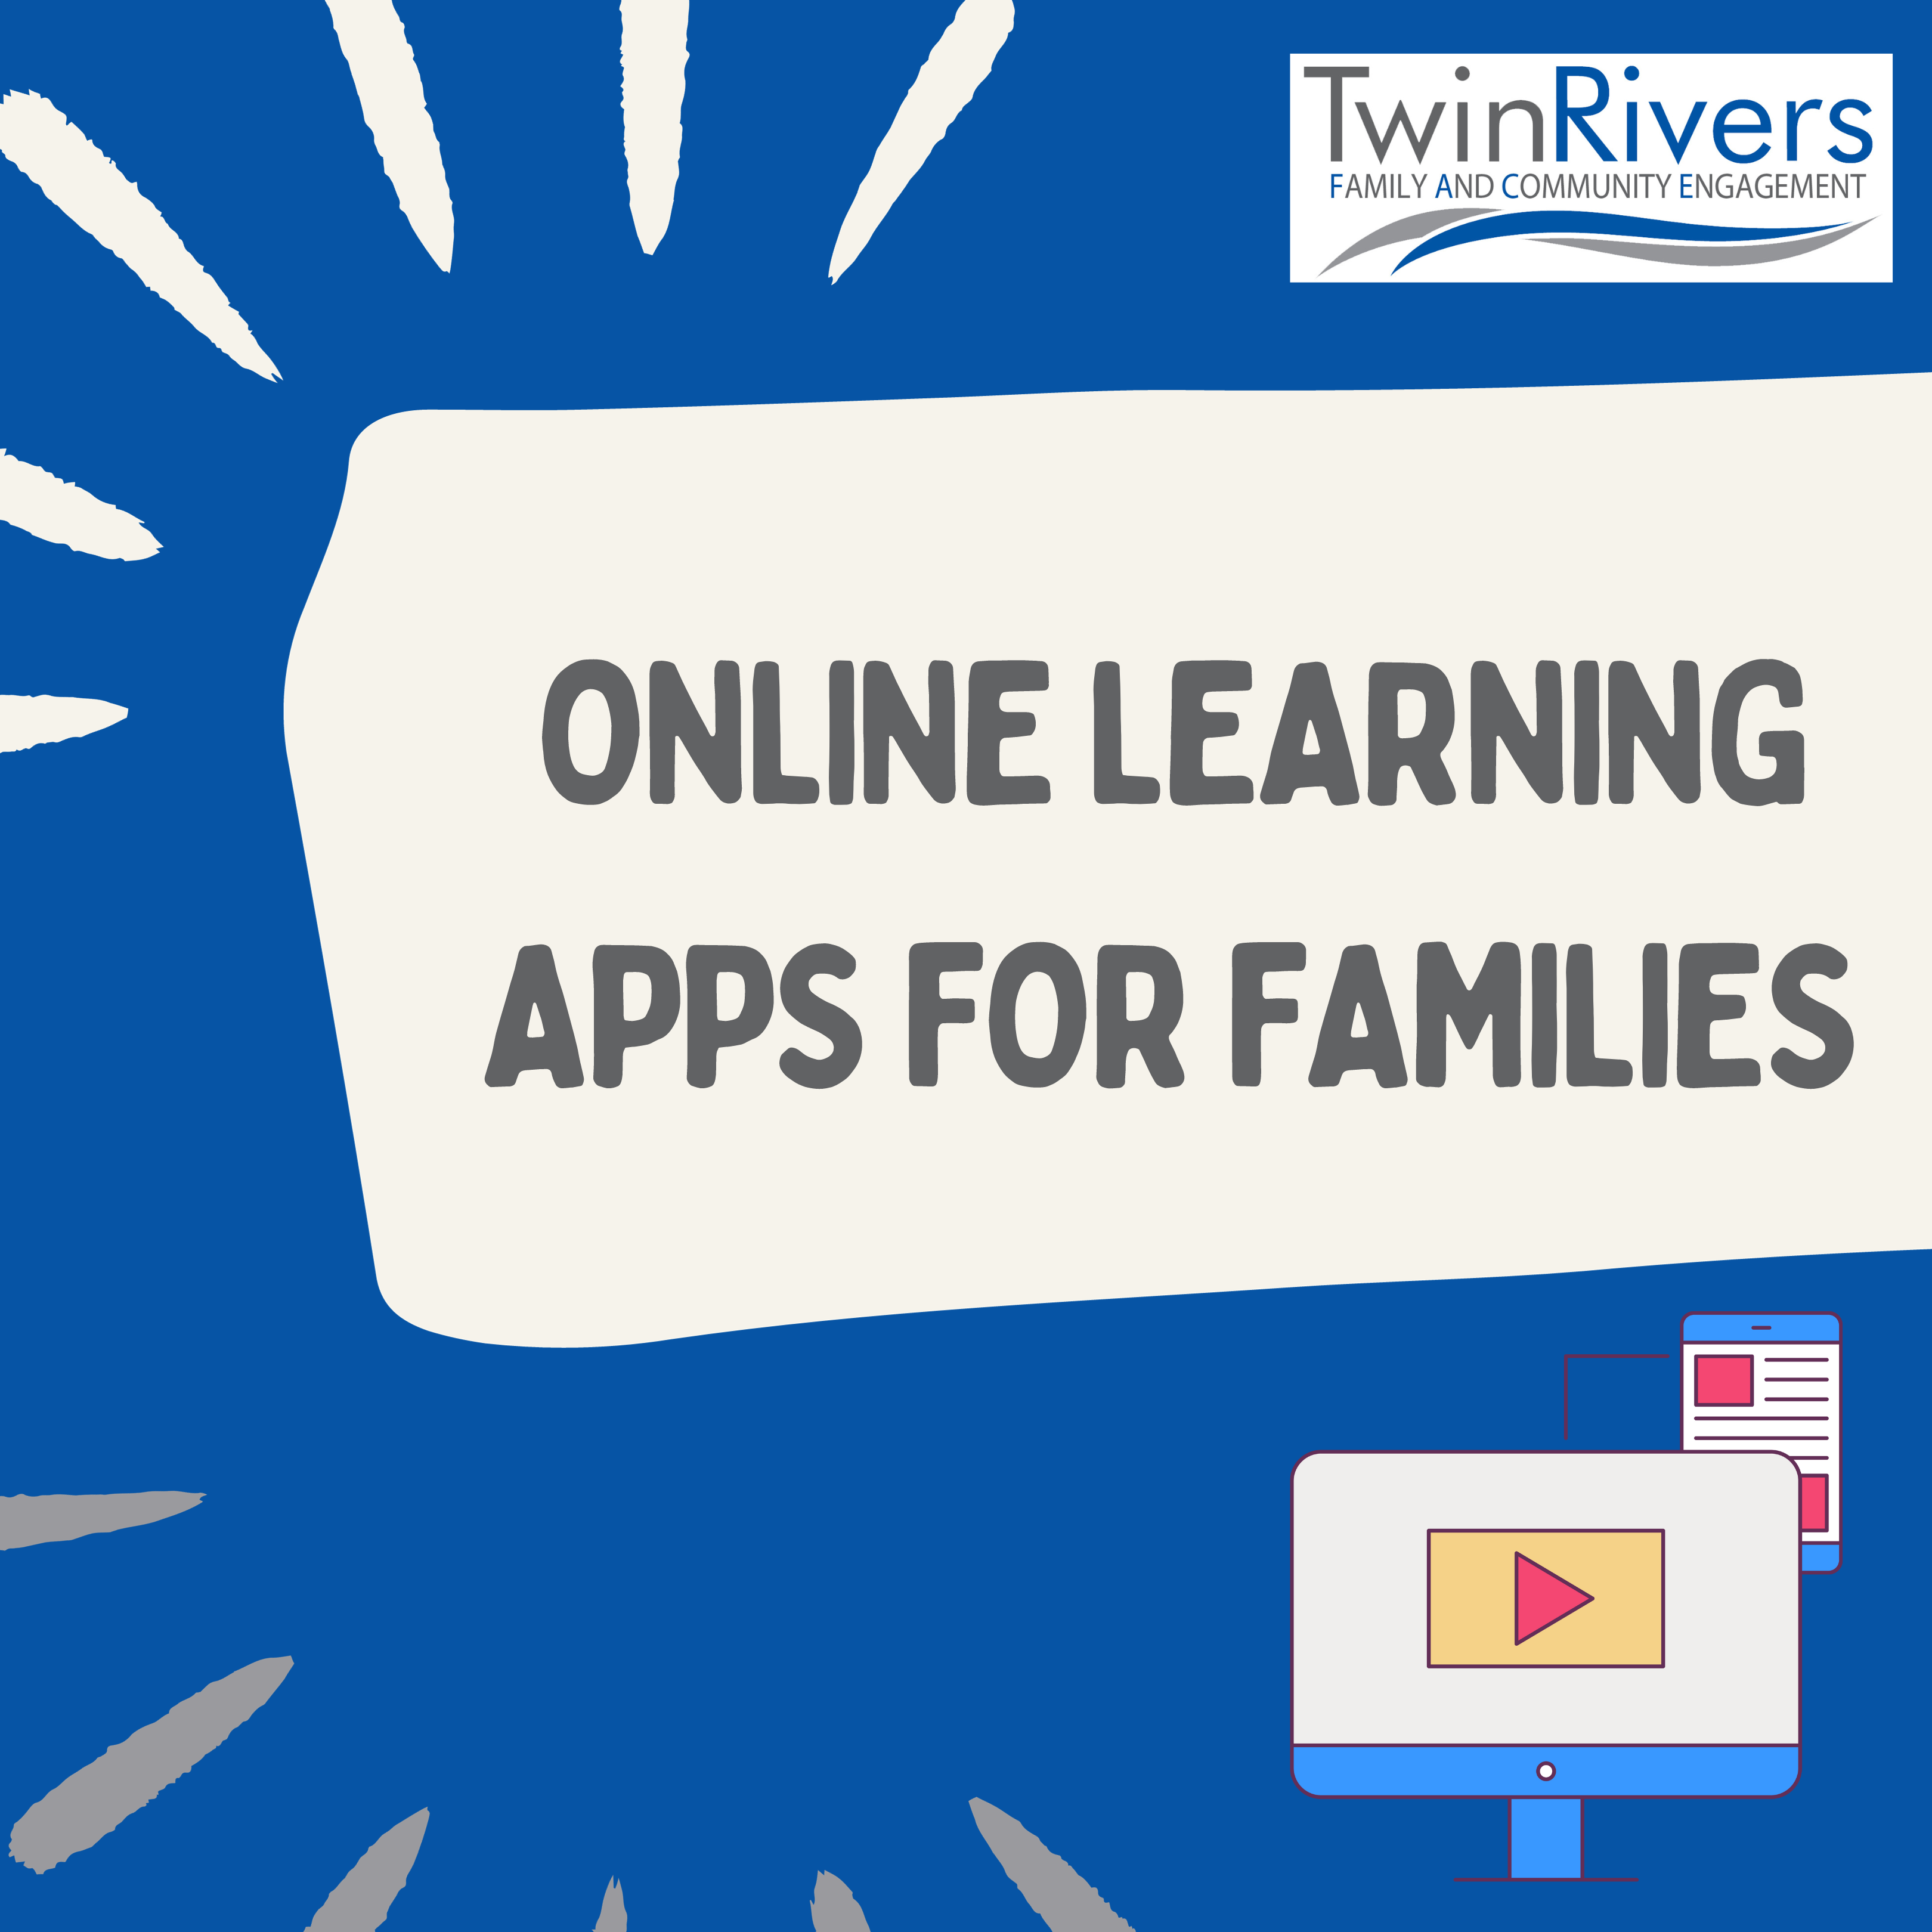 Online Learning Apps for Families